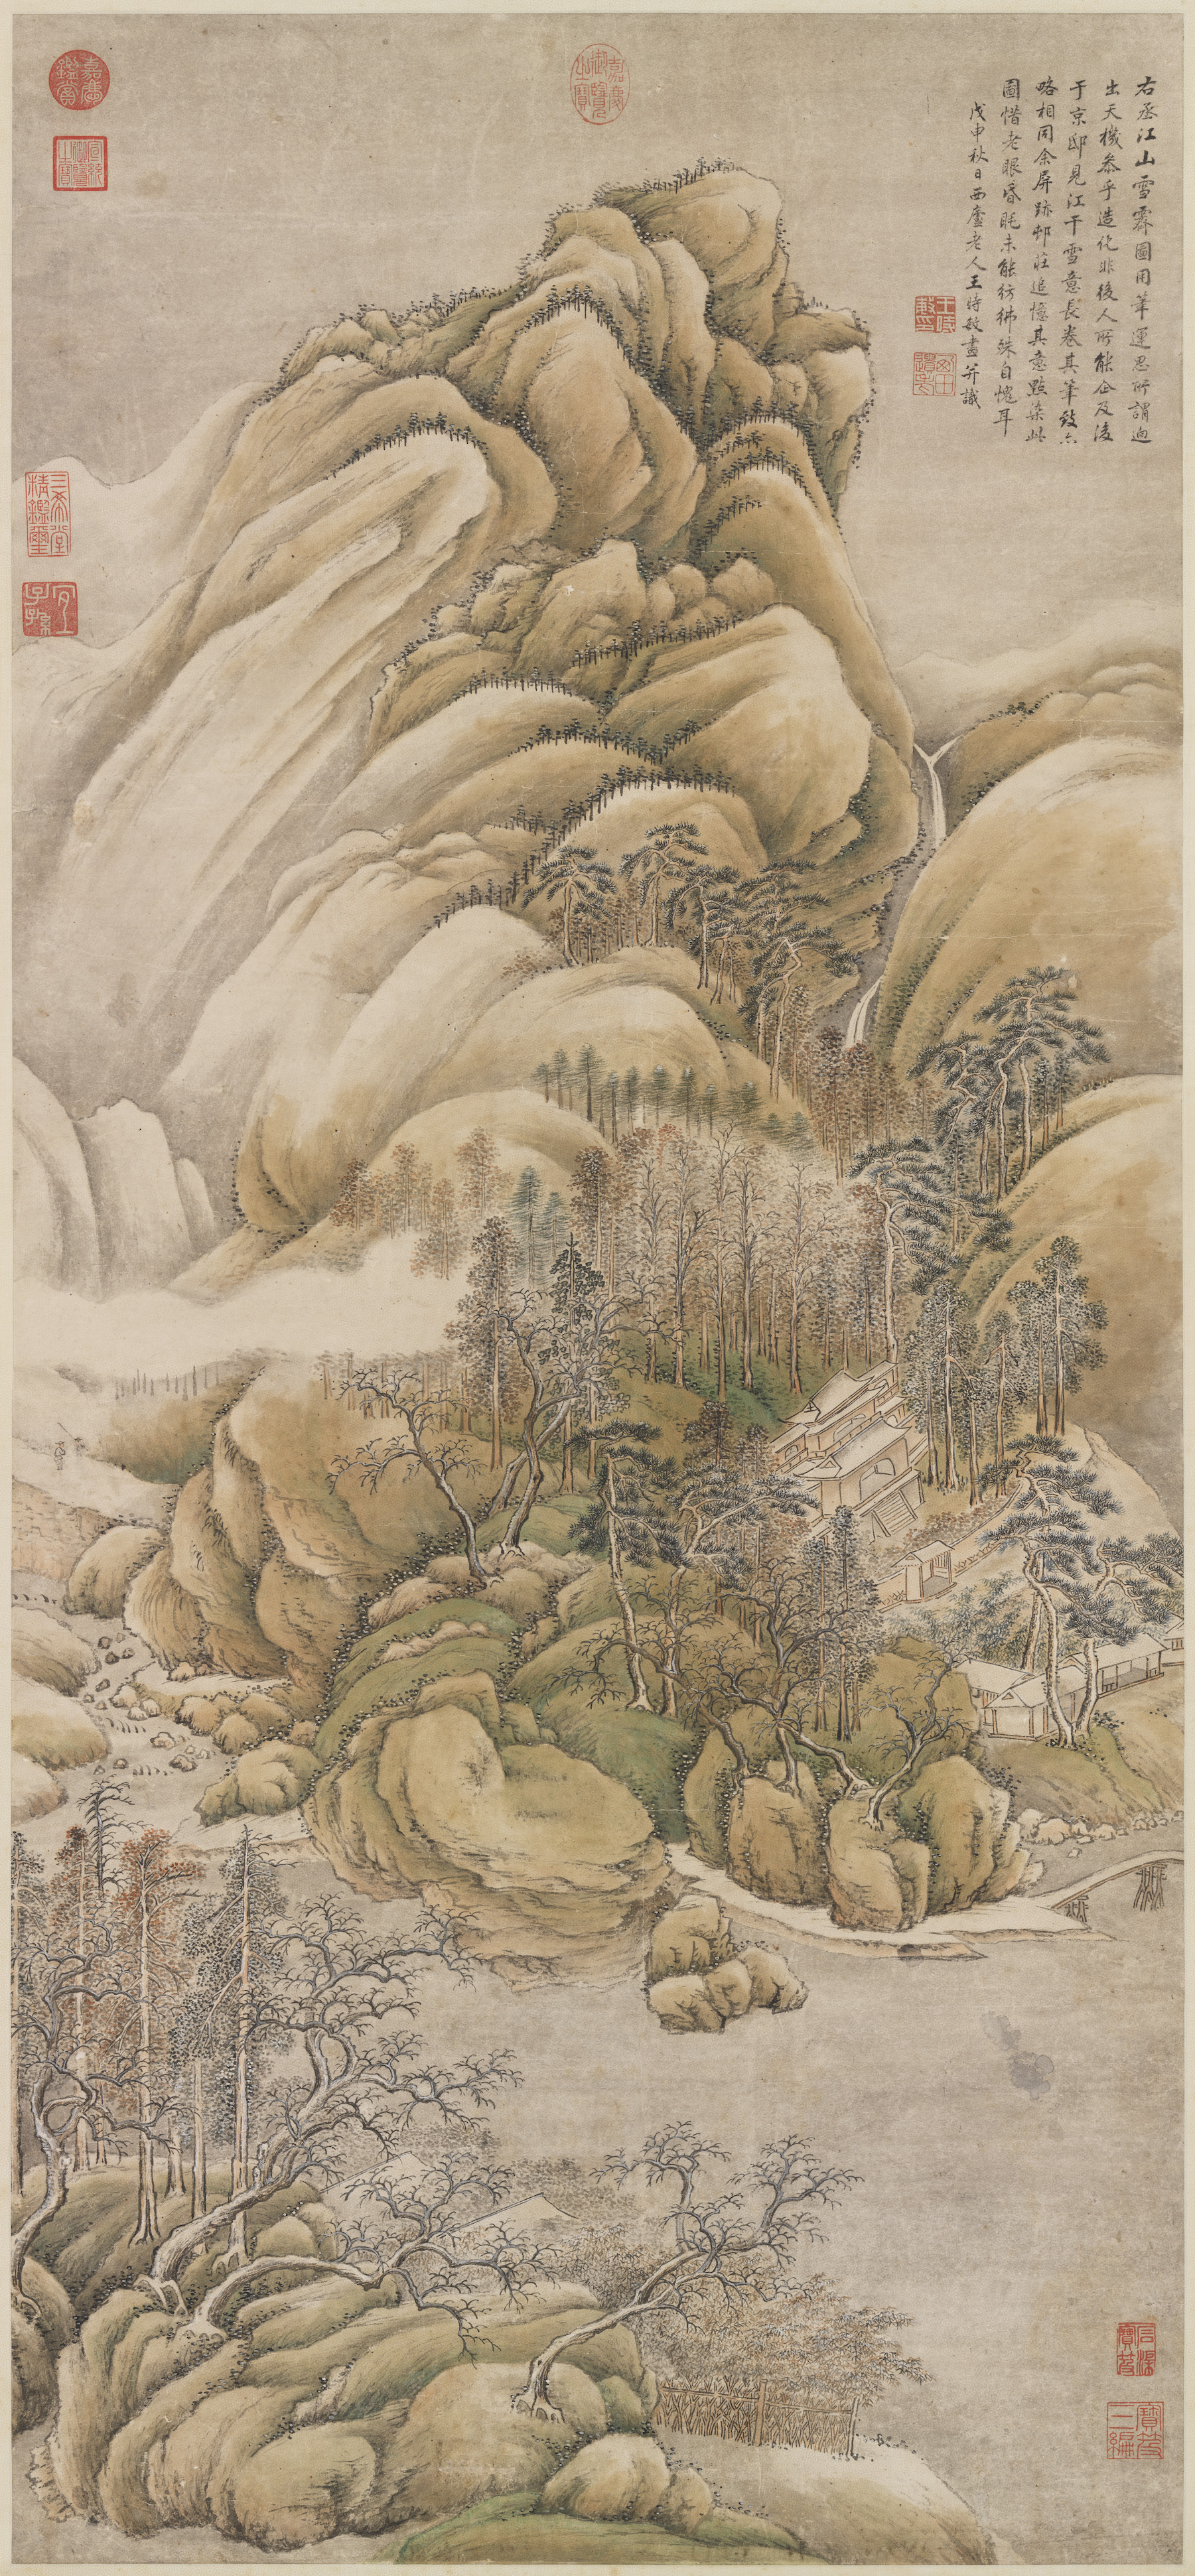 In Imitation of Wang Wei’s "Clearing After Snow Over Rivers and Mountains"